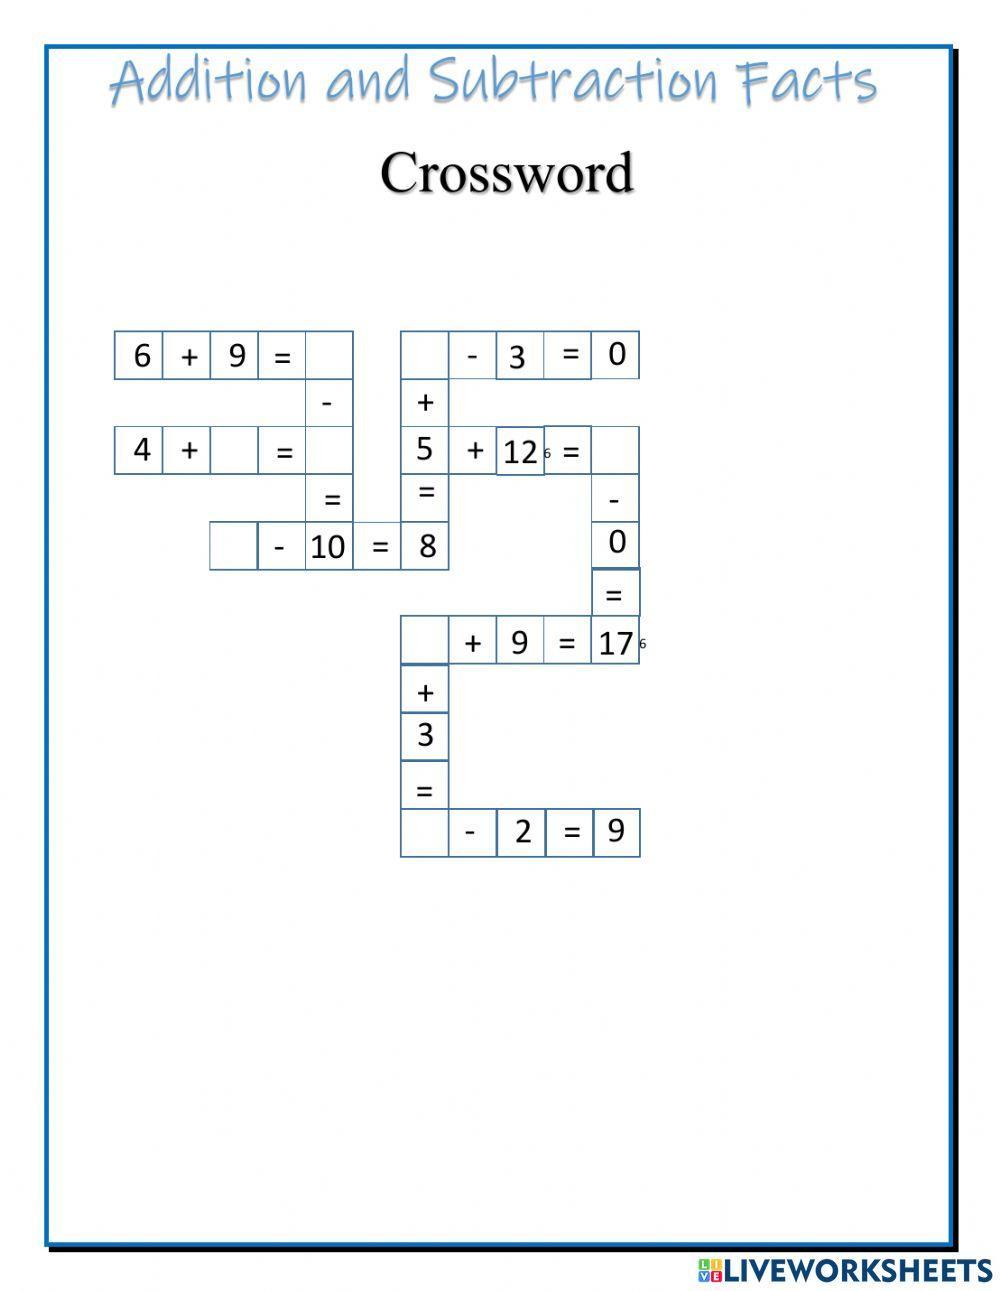 Addition and Subtraction Facts Crossword